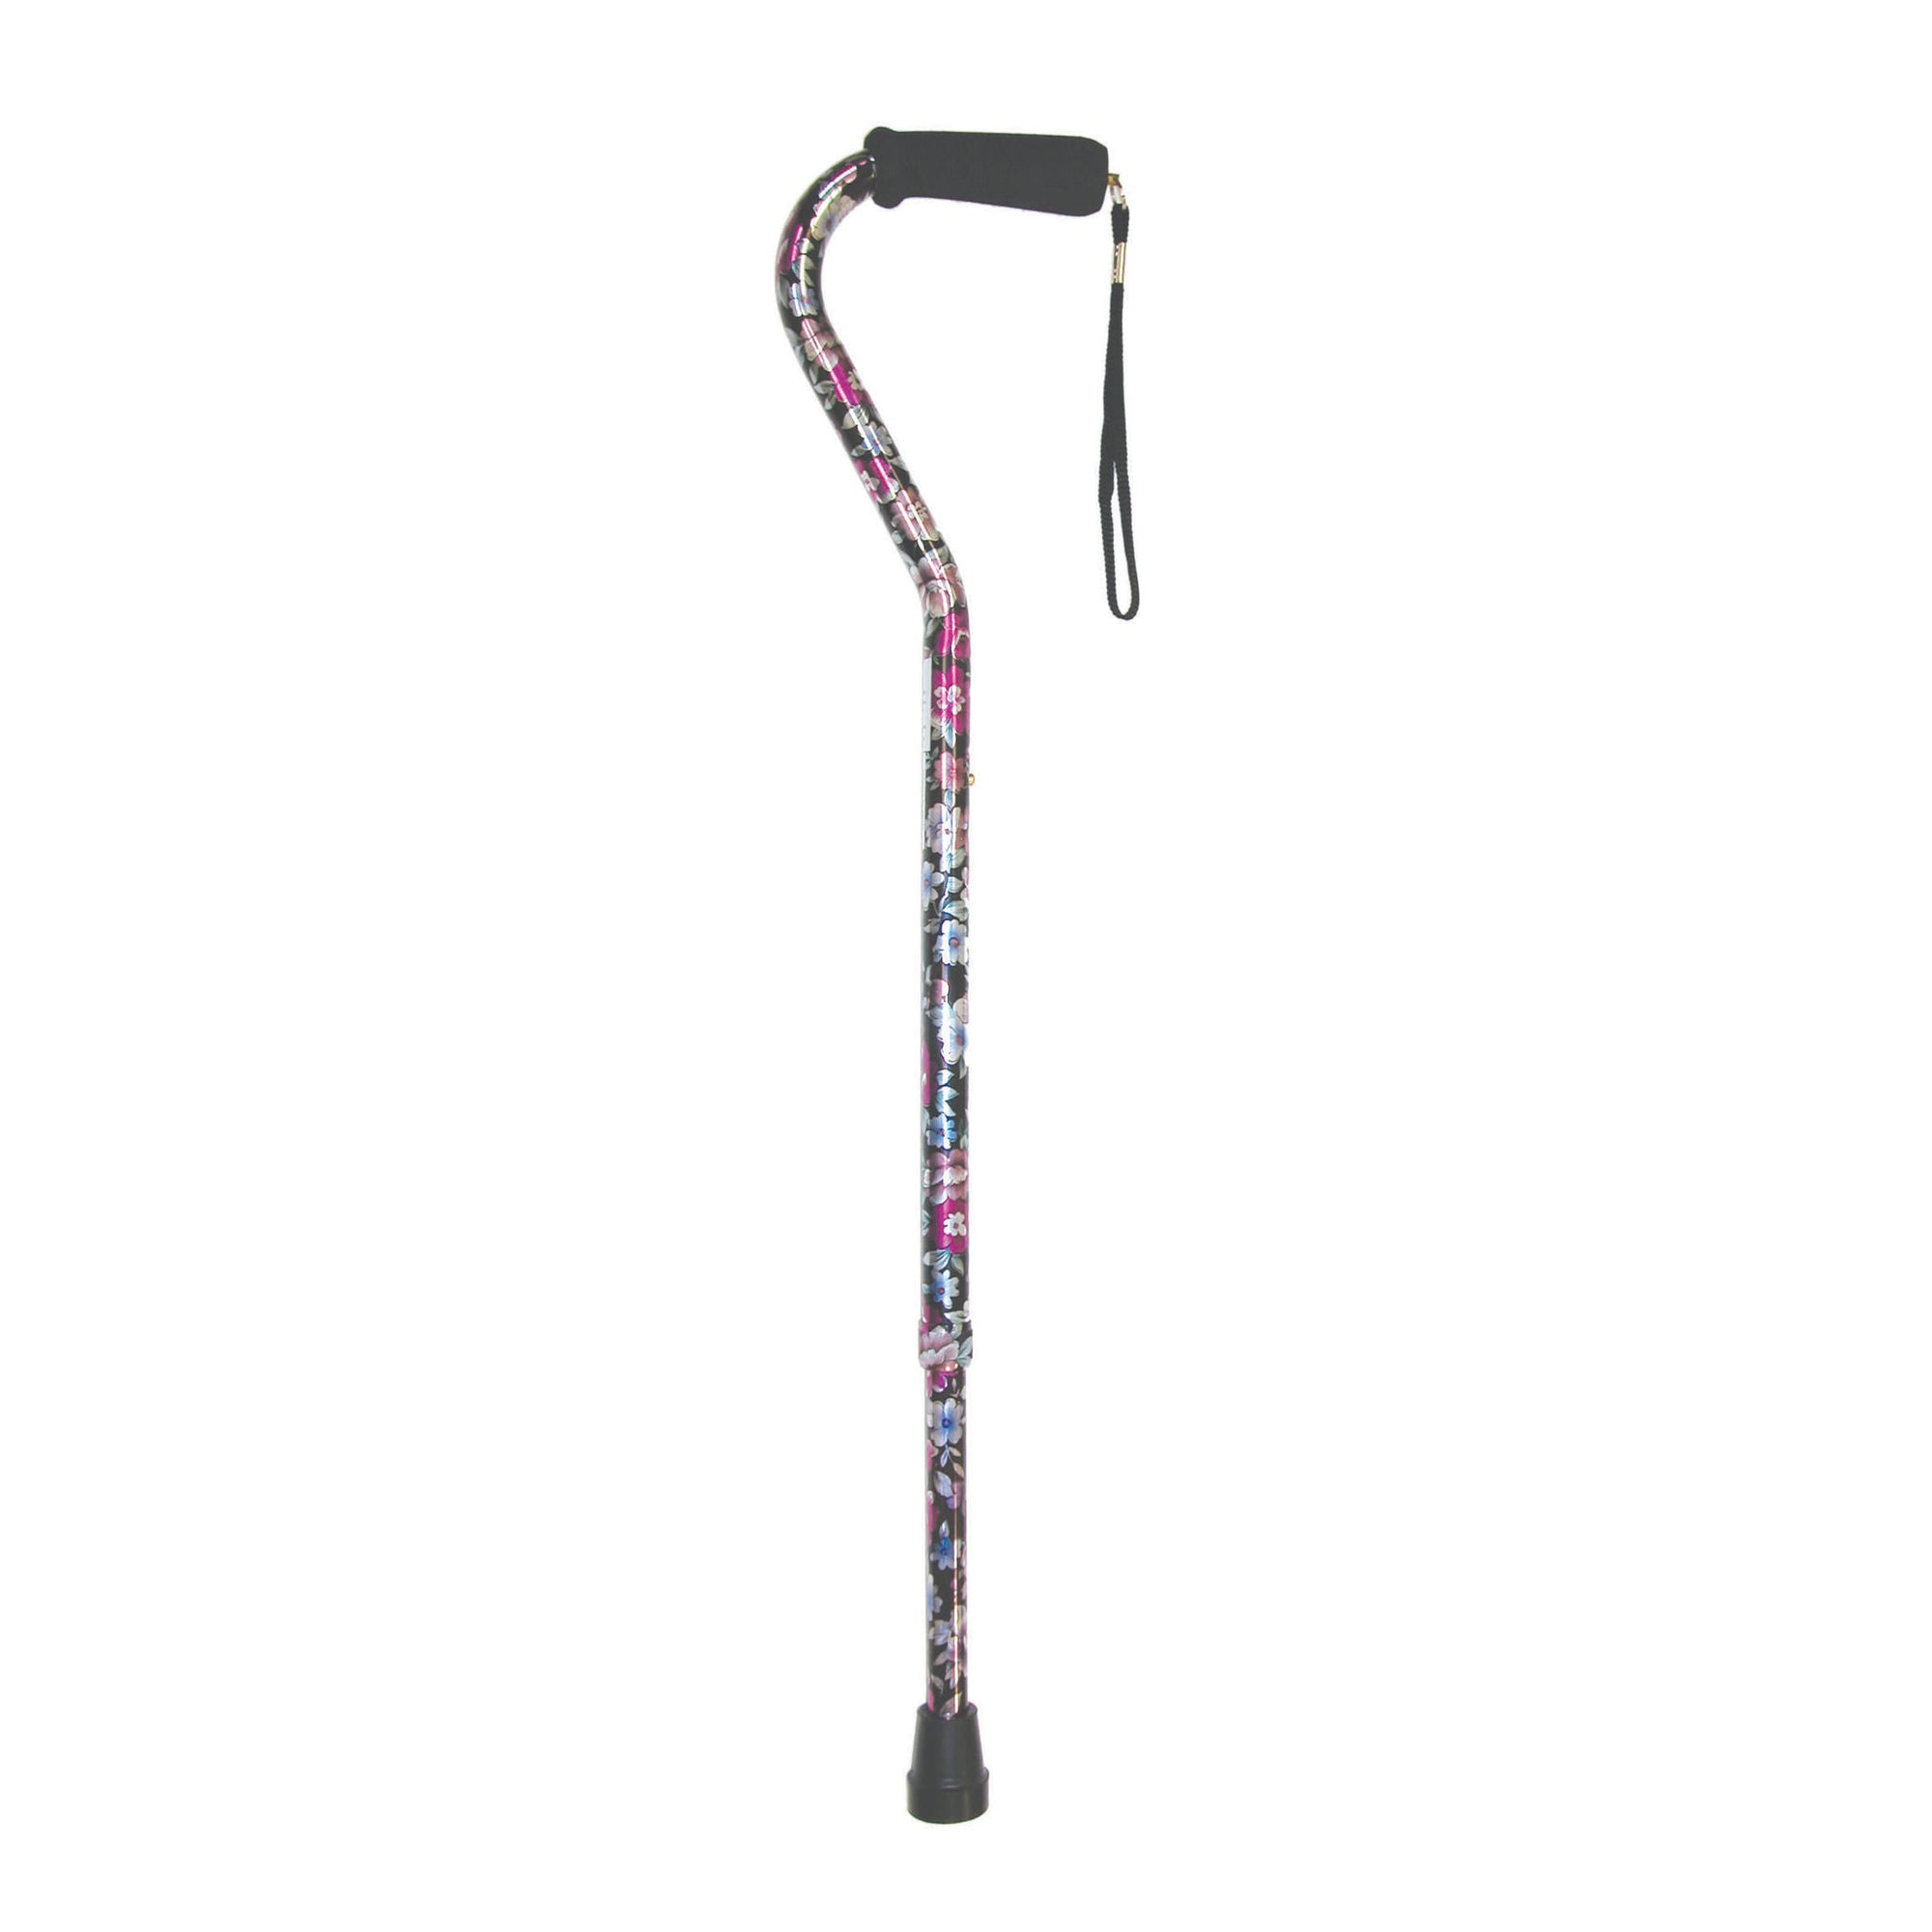 Mabis Traditional Wooden Men's Crook Cane - Just Walkers